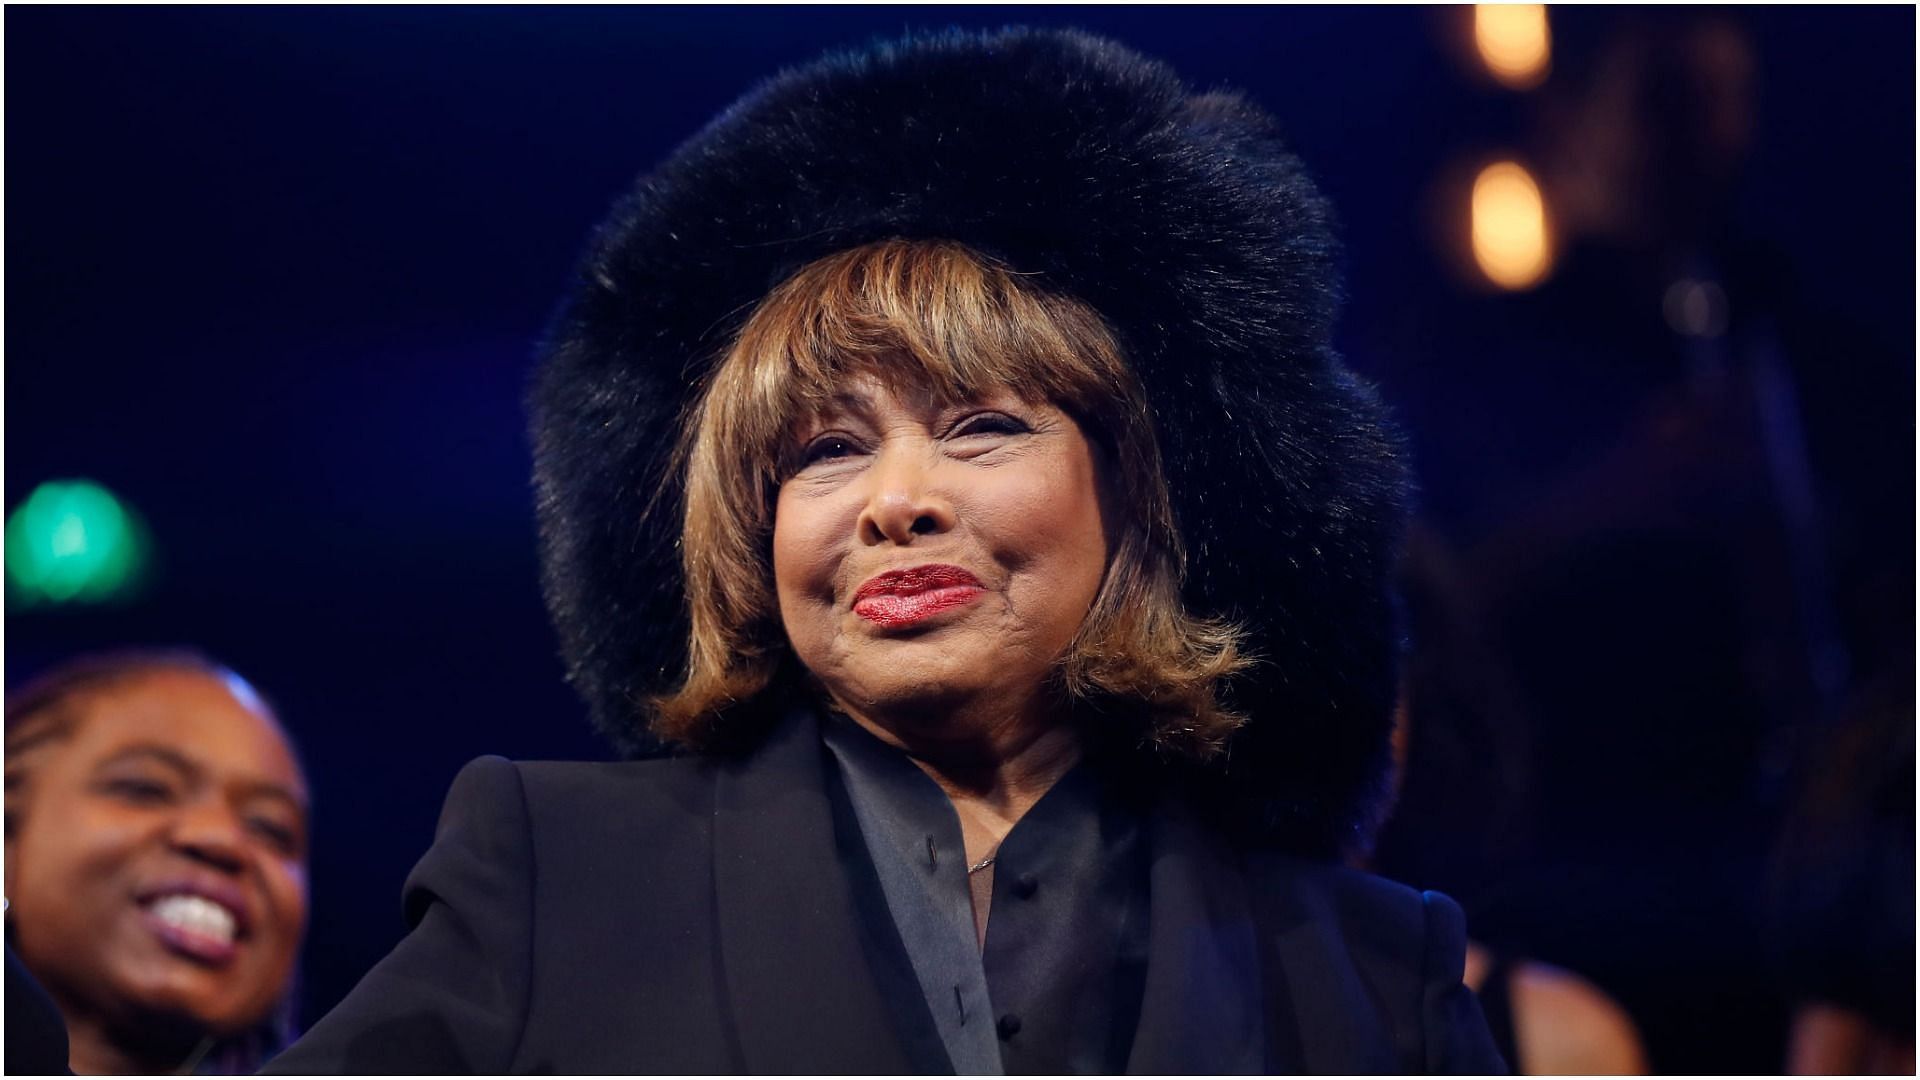 Tina Turner during the premiere of the musical &#039;Tina - Das Tina Turner Musical&#039; at Stage Operettenhaus (Image via Franziska Krug/Getty Images)